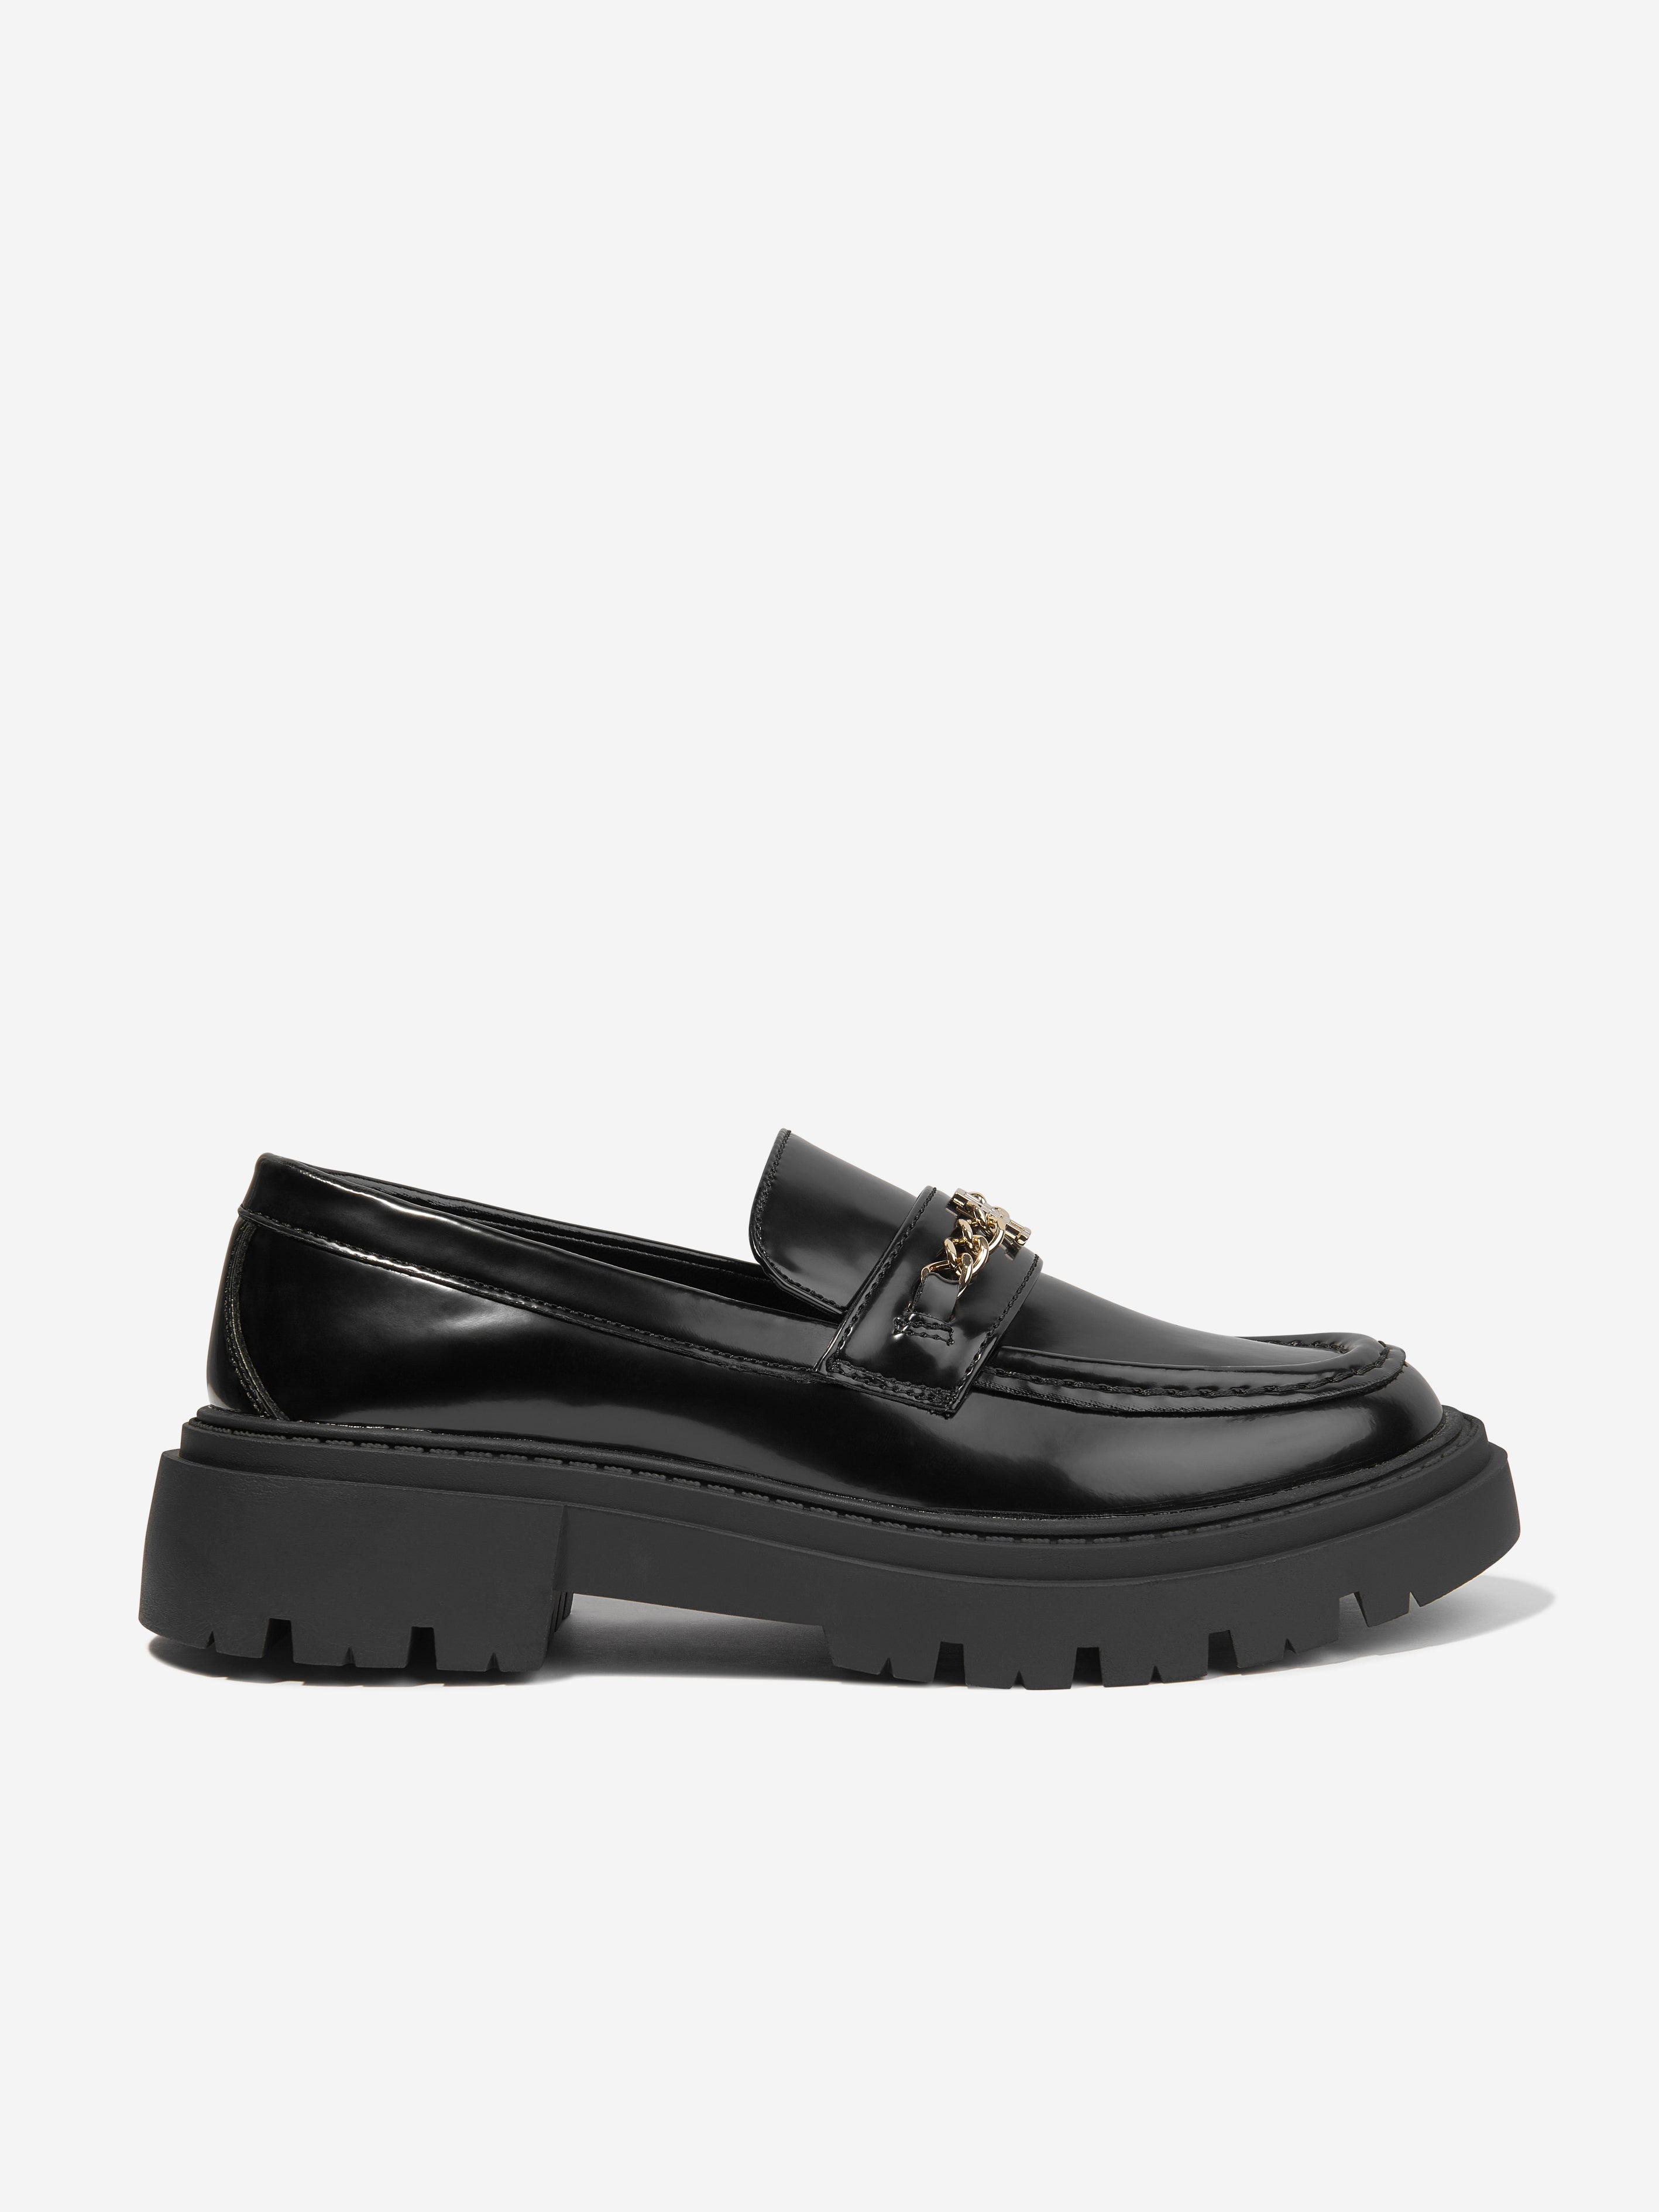 Girls Patent Leather Loafers in Black | Childsplay Clothing